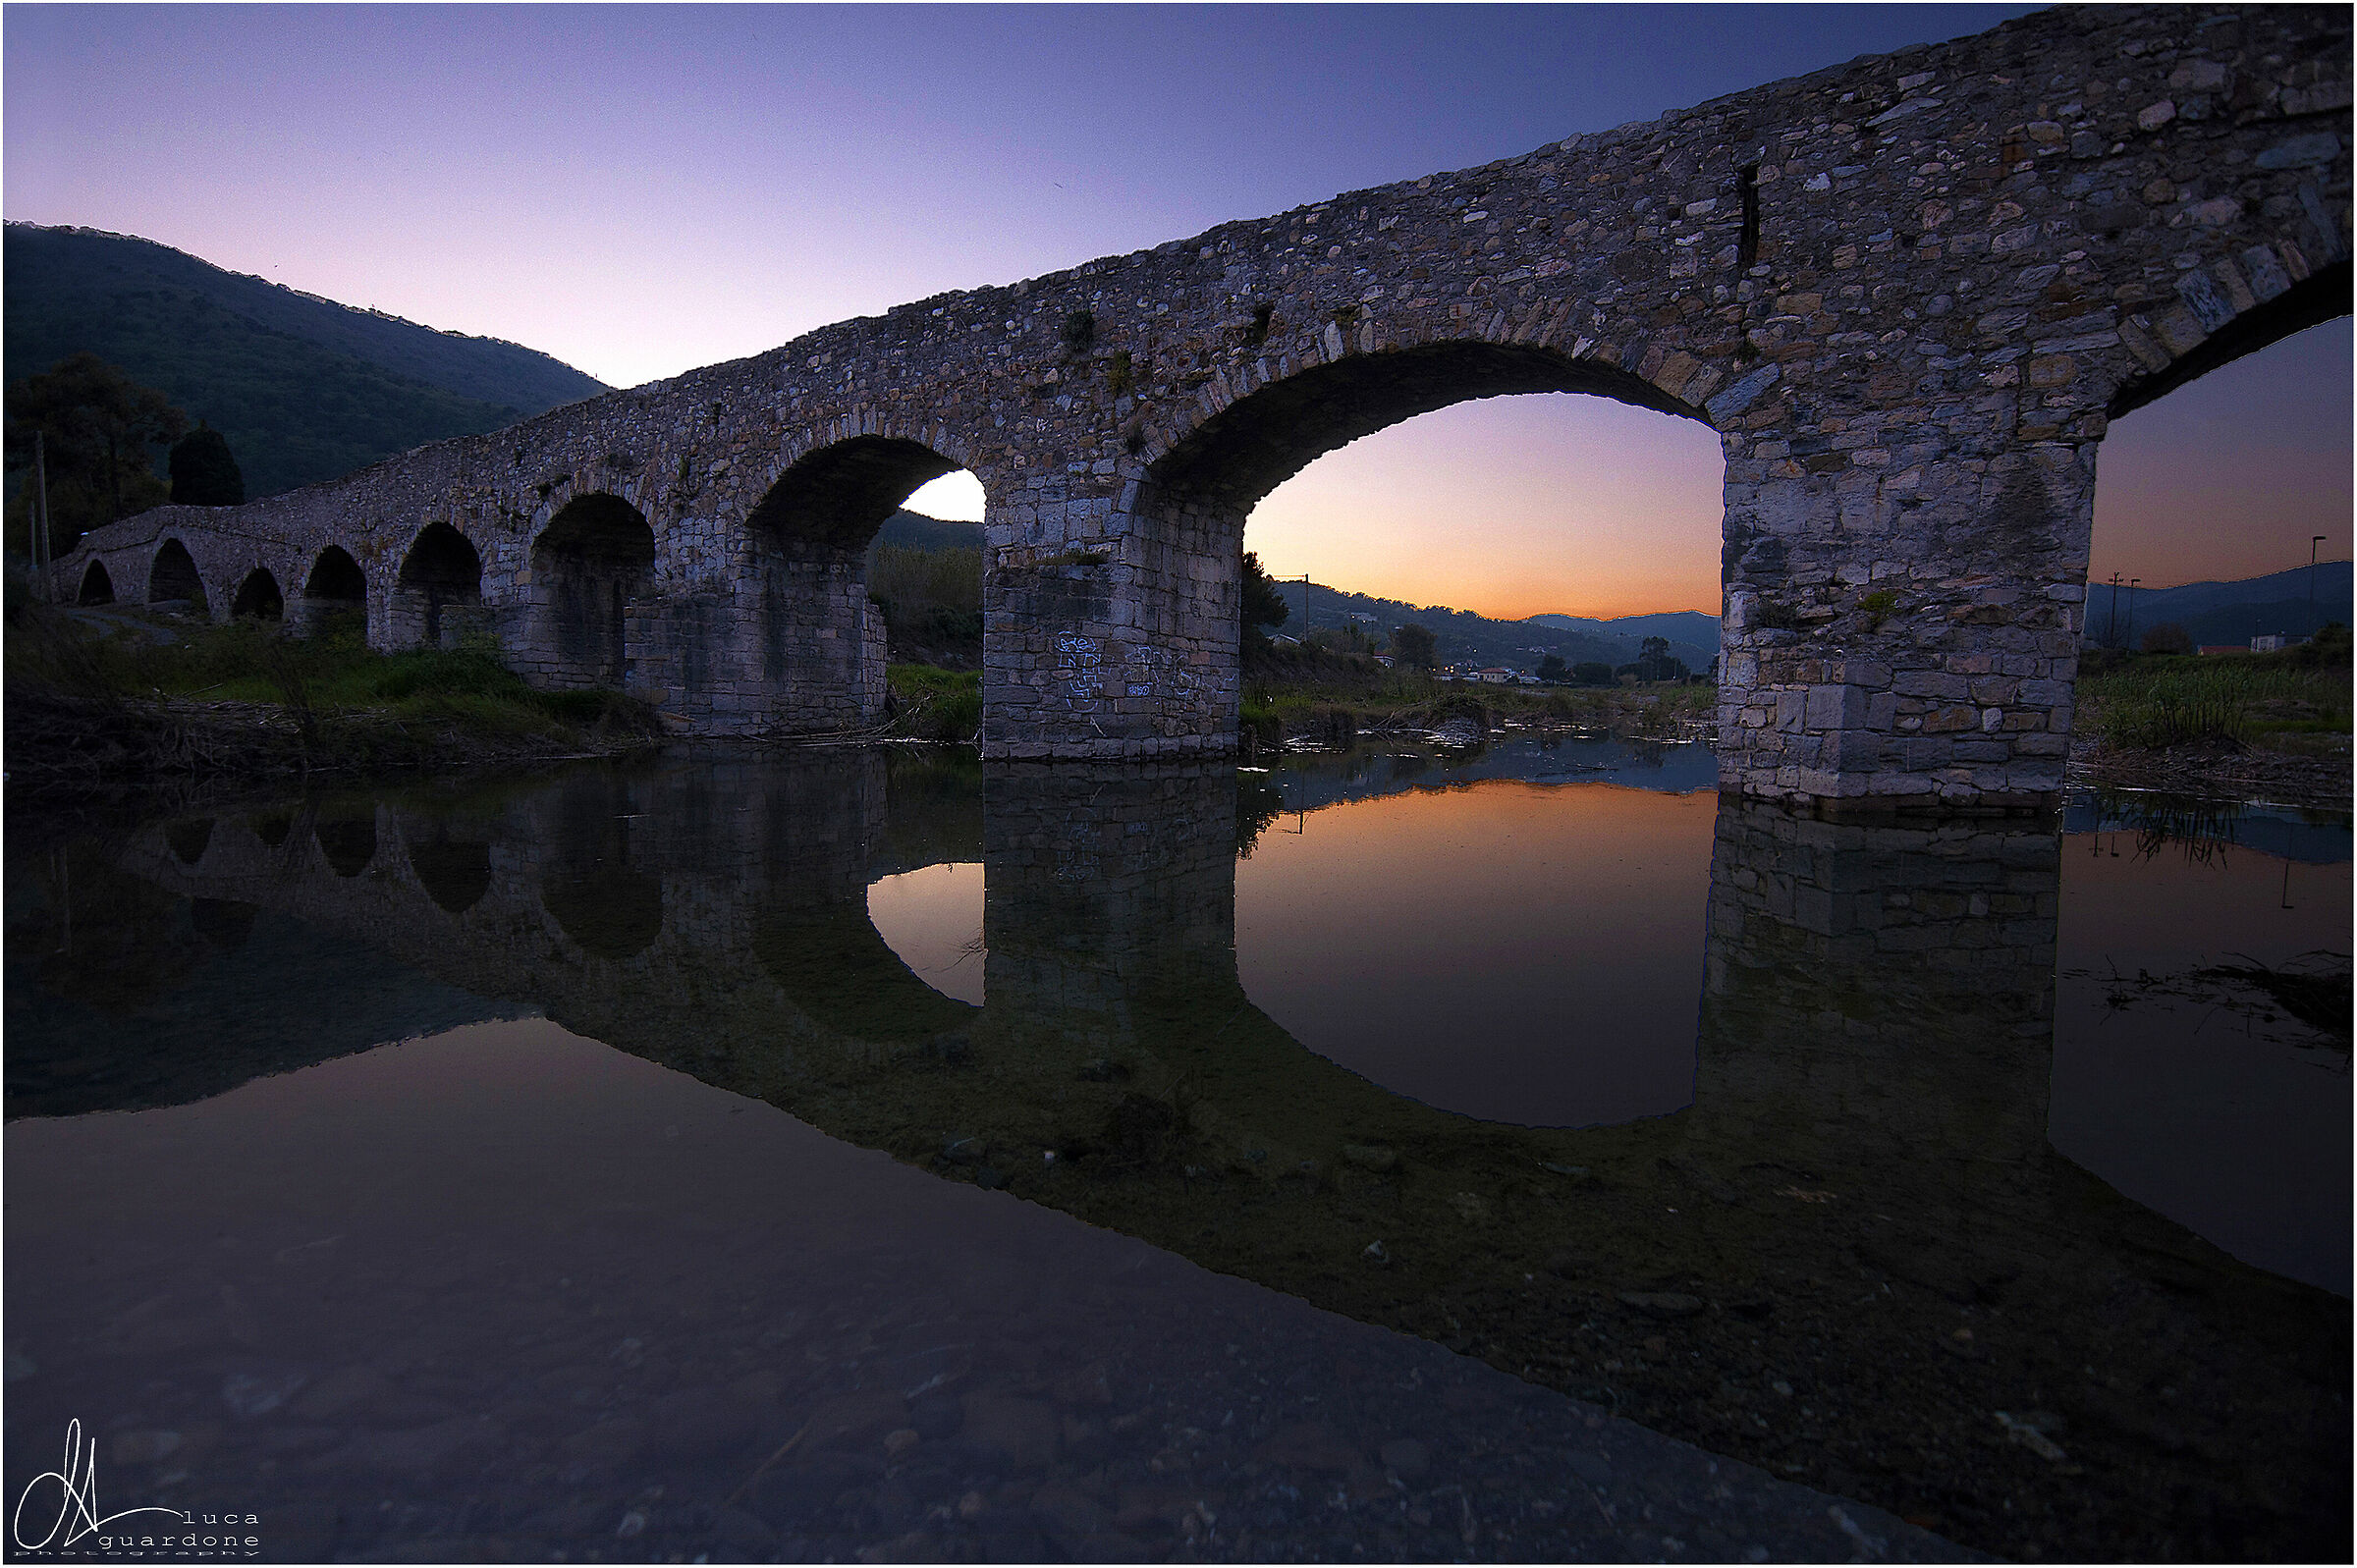 The medieval bridge and its arches...